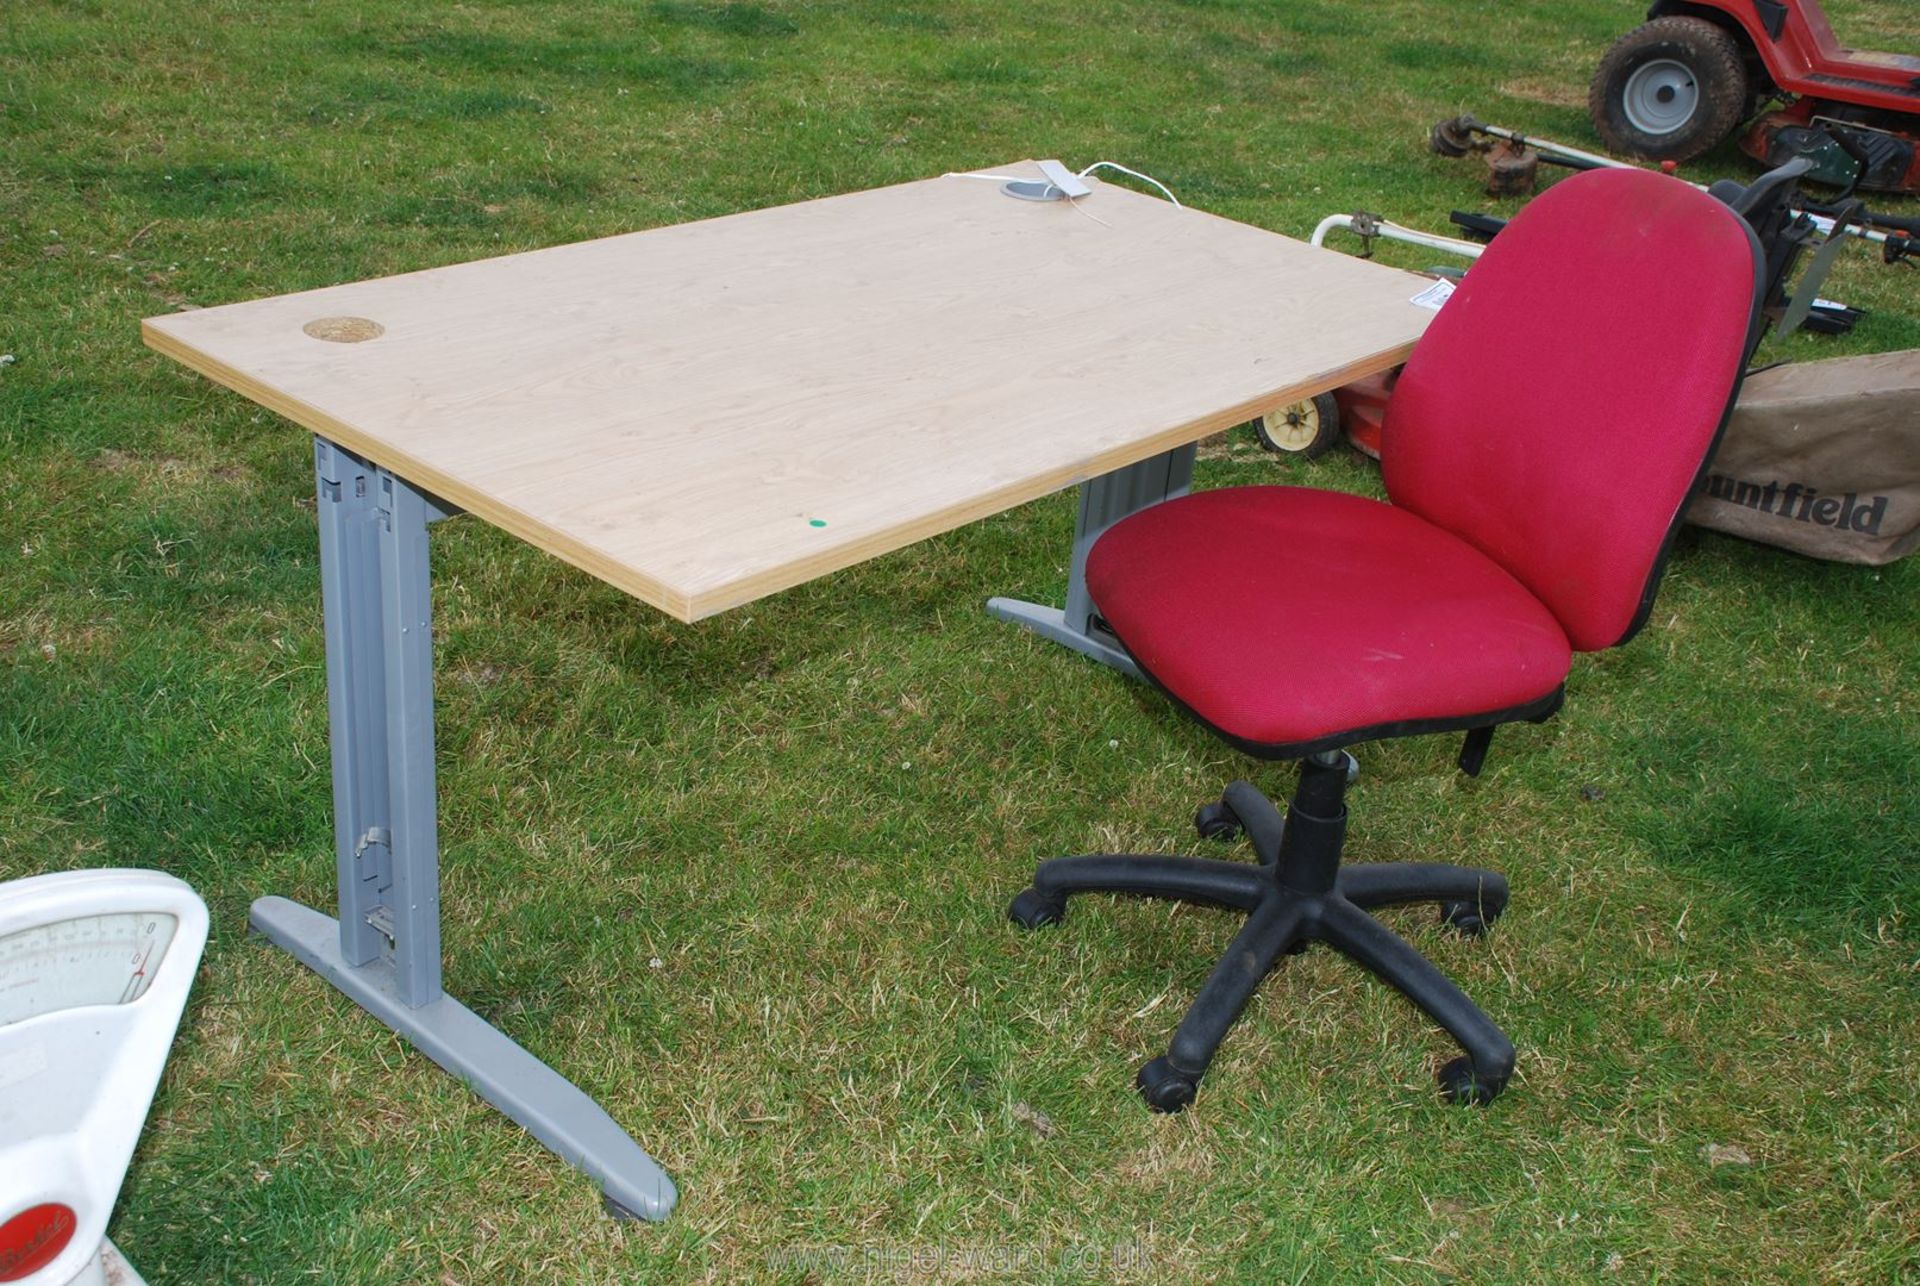 A computer desk and chair.